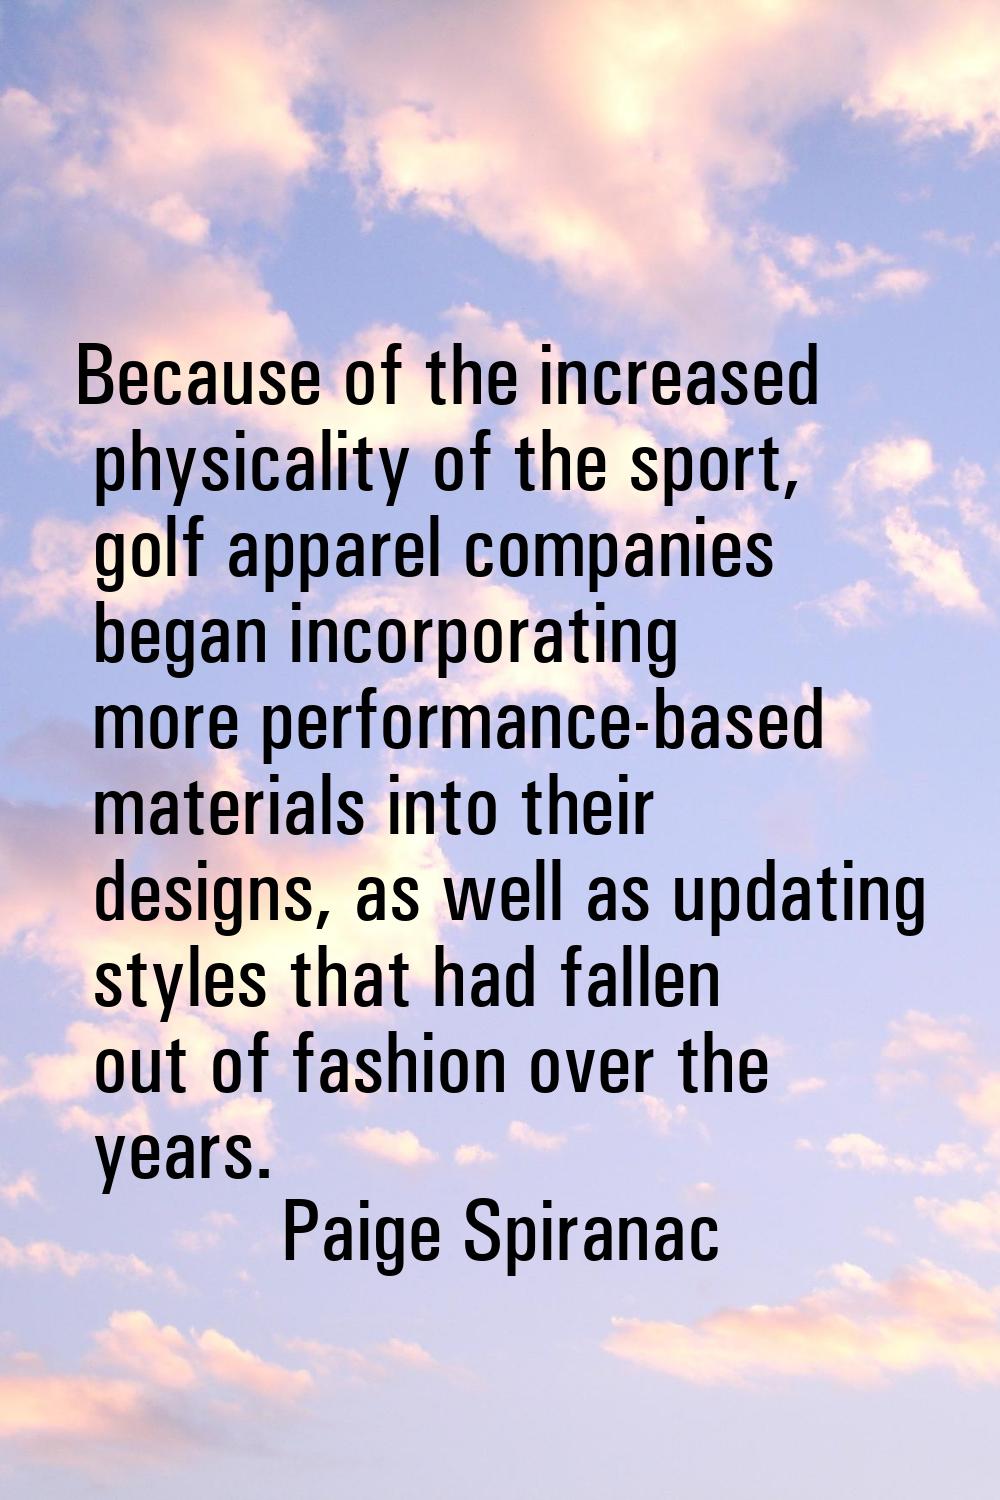 Because of the increased physicality of the sport, golf apparel companies began incorporating more 